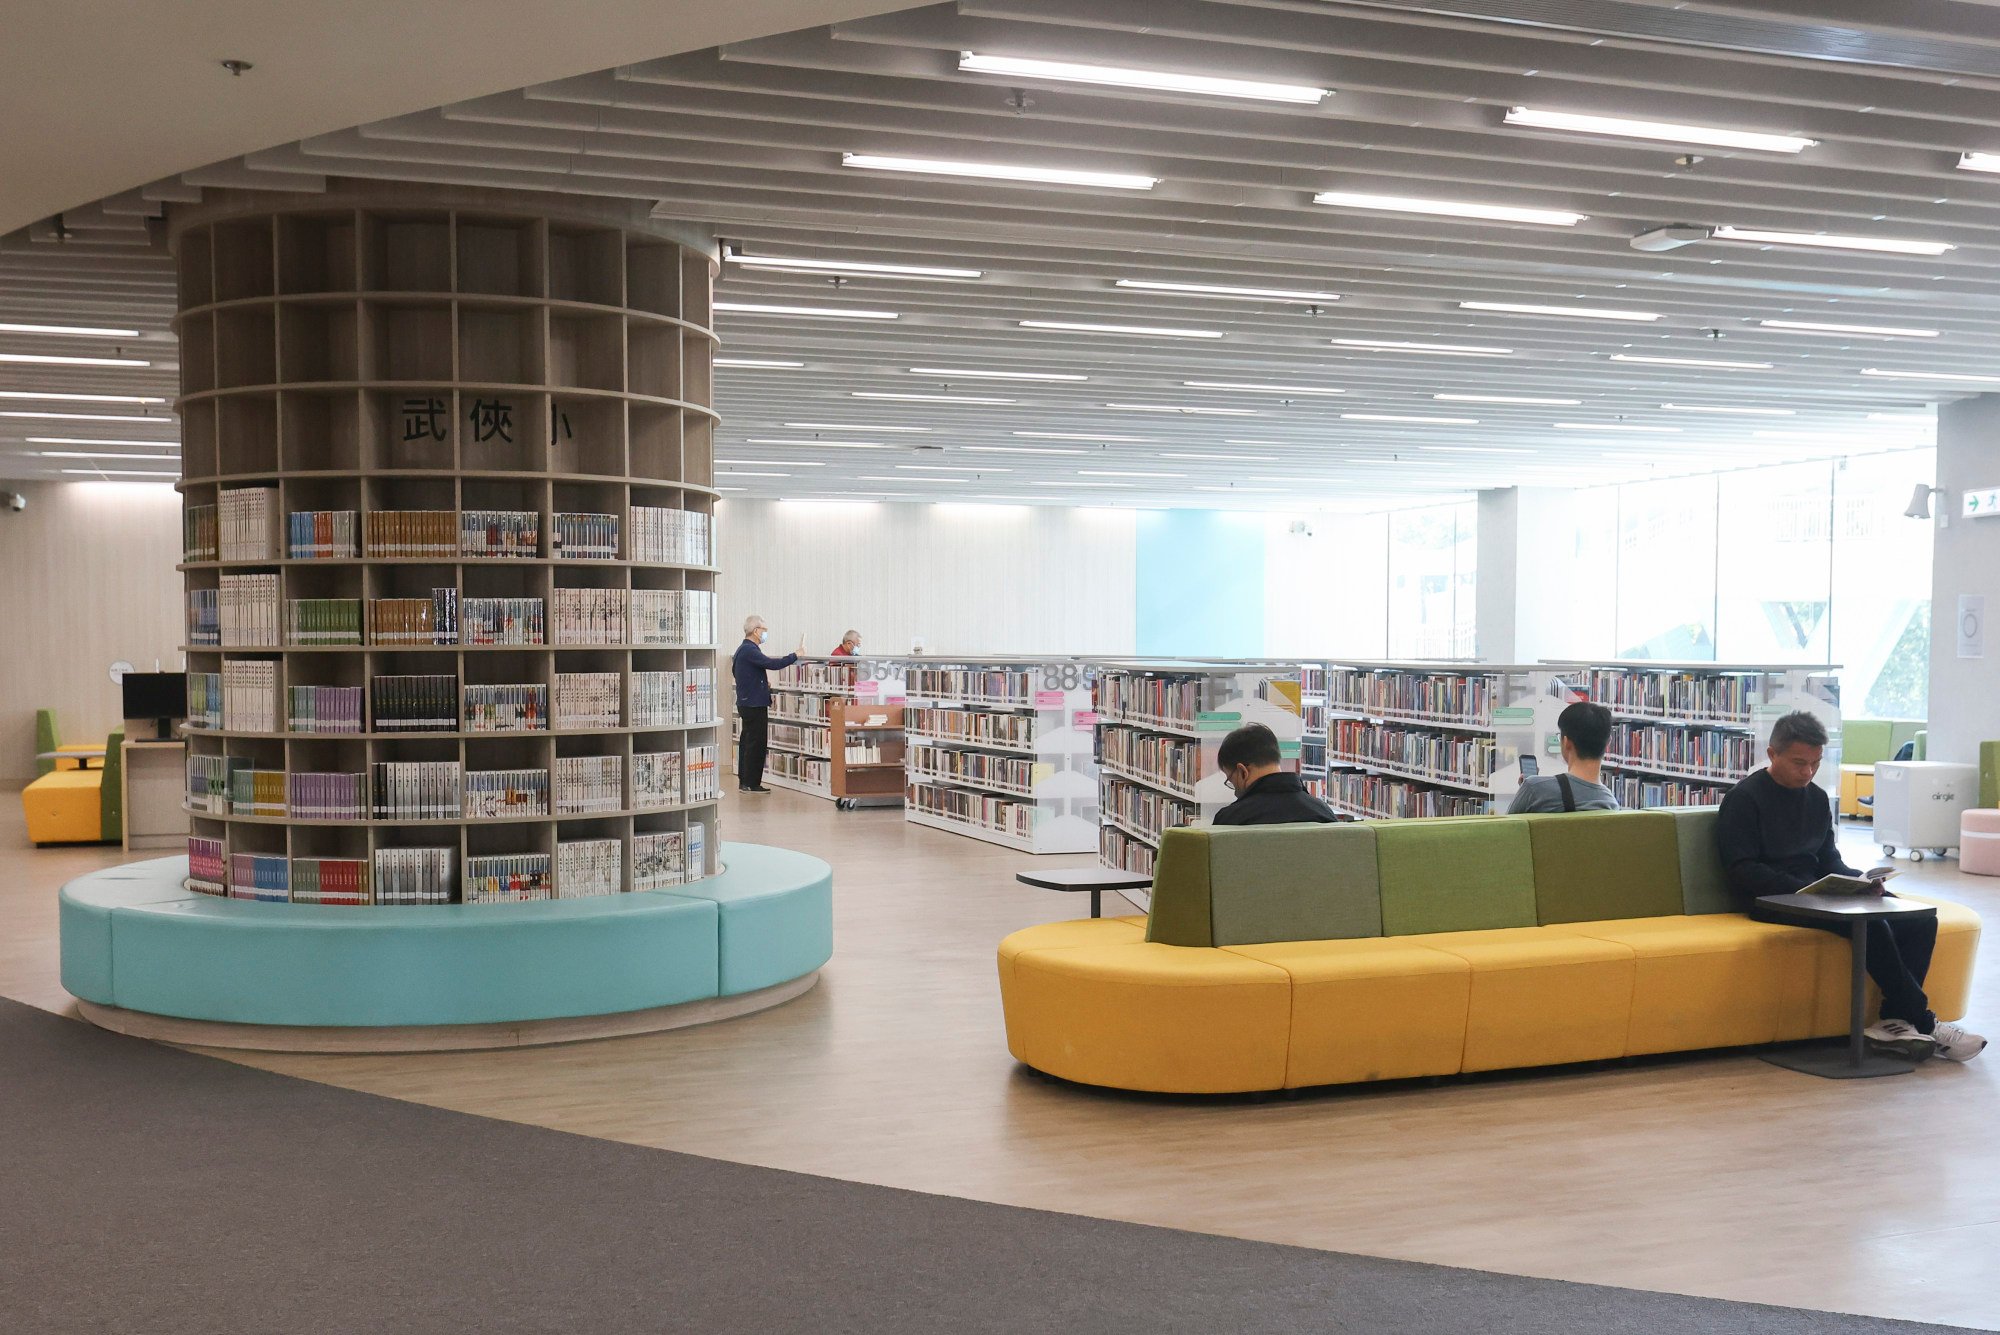 can hong kong libraries win back readers? public facilities try every trick in the book to lose ‘boring’ label amid rise of e-texts, pandemic habits